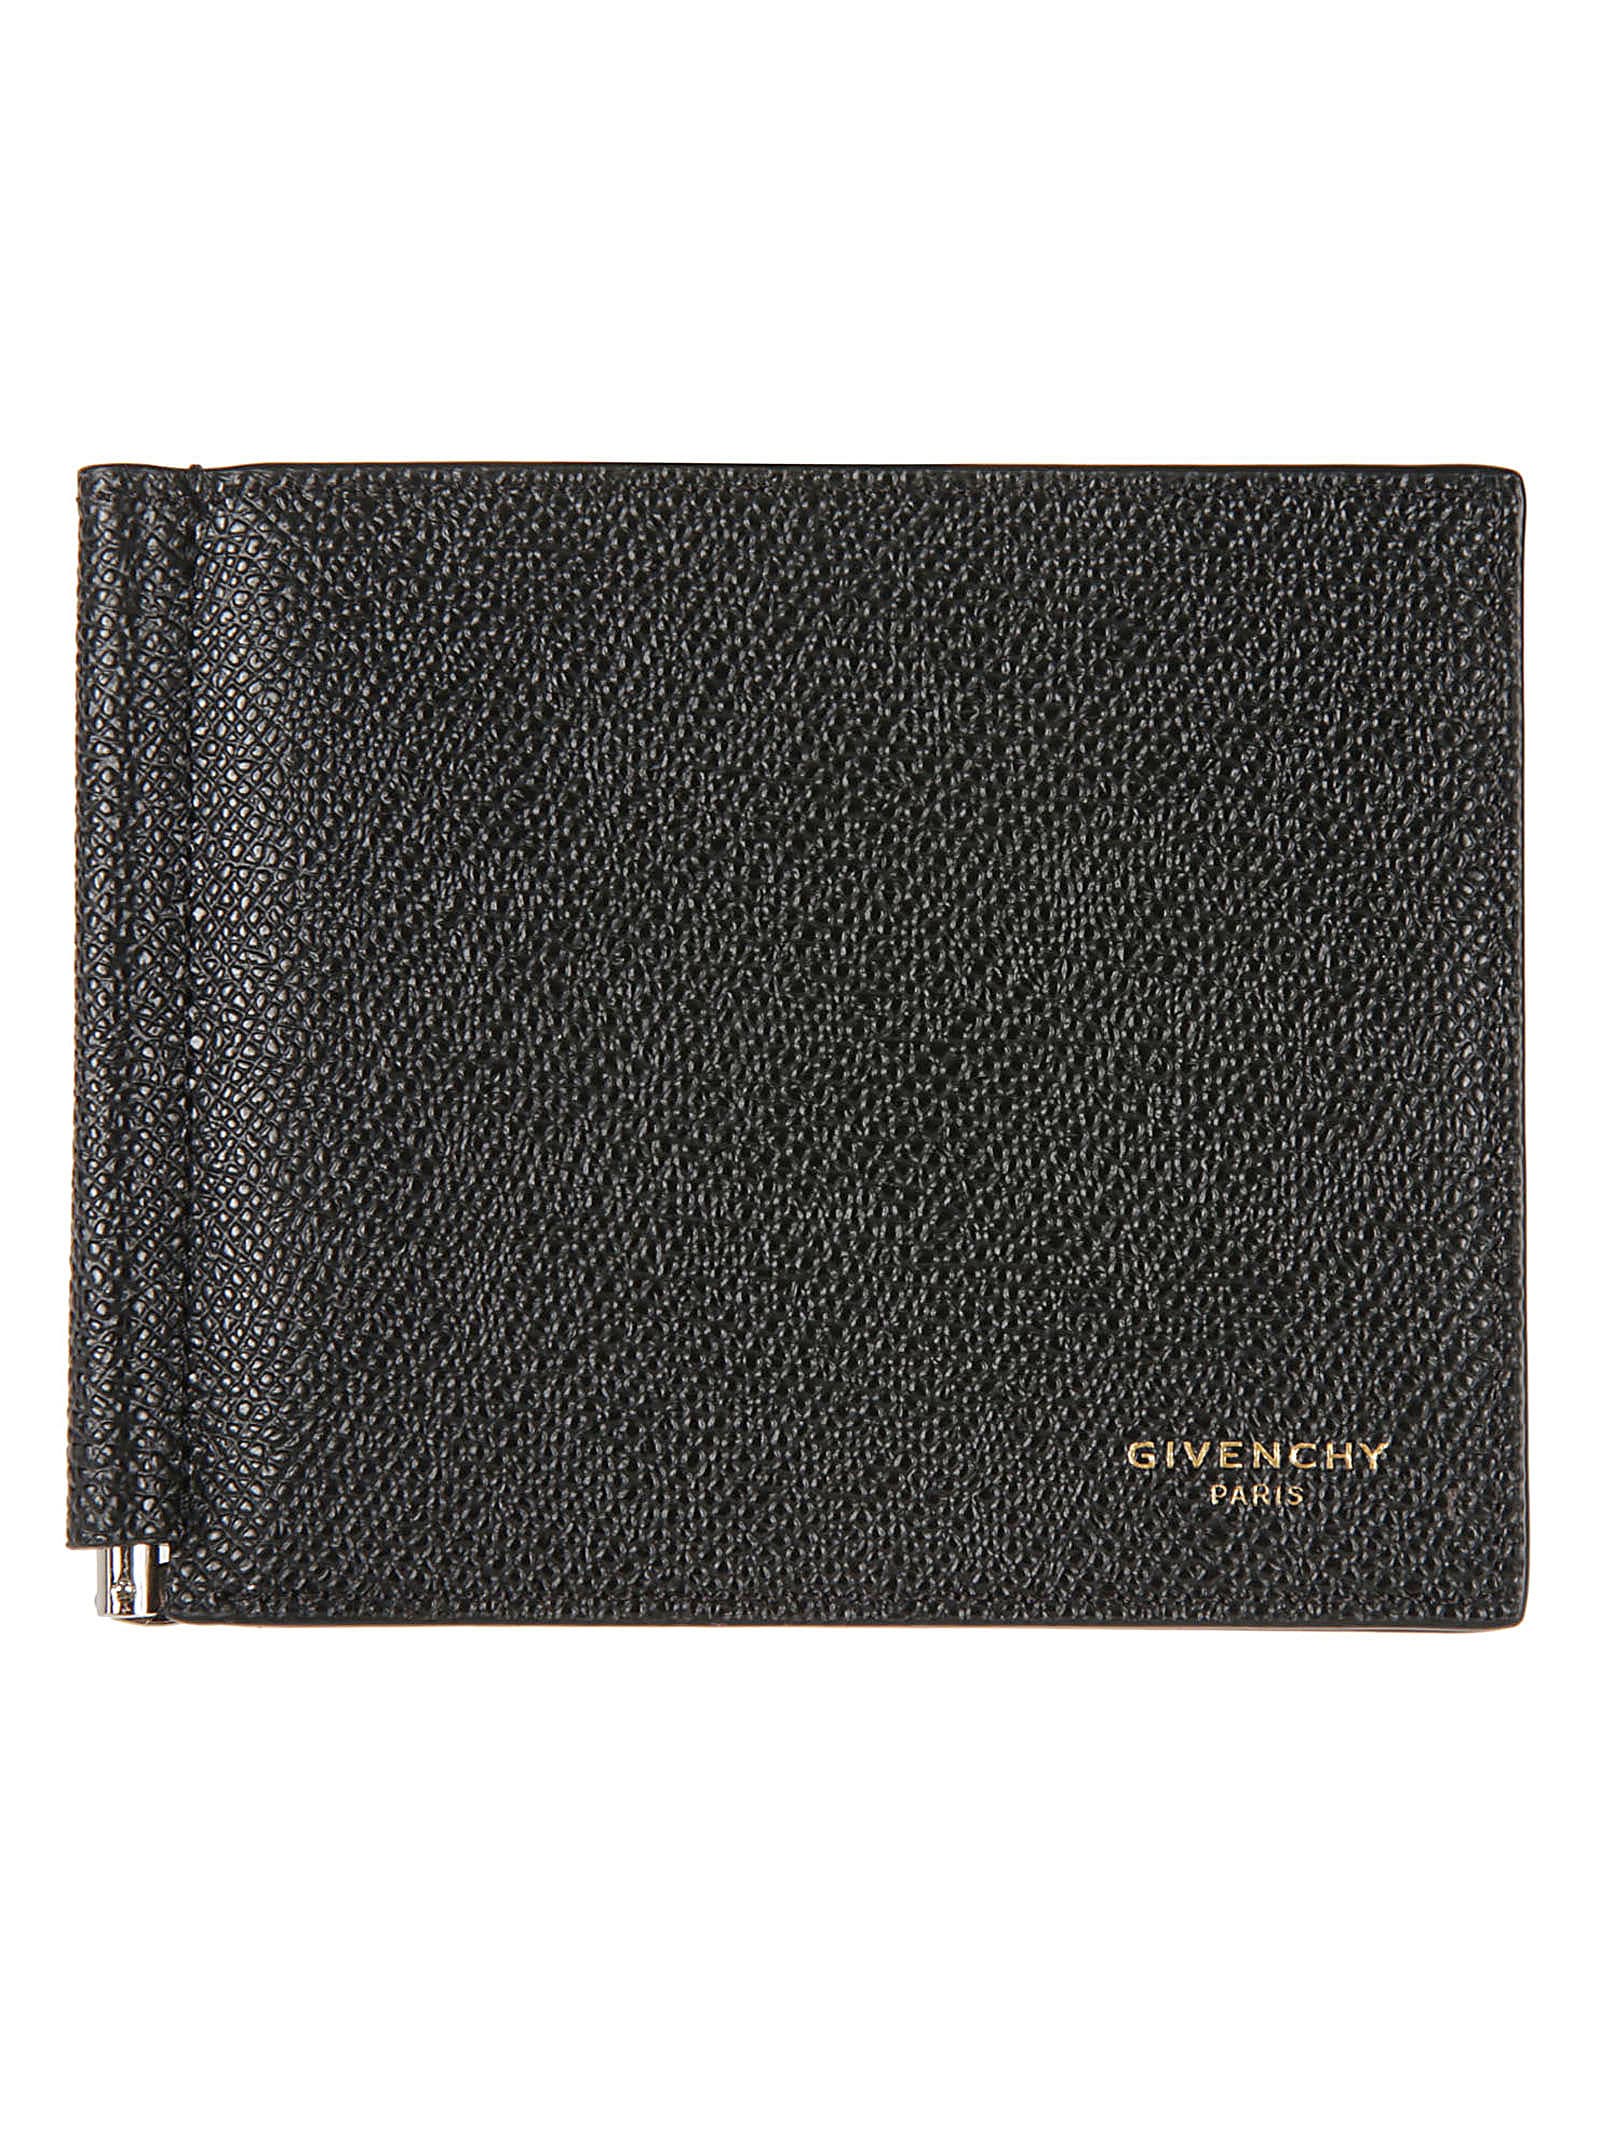 Givenchy engraved logo bifold wallet